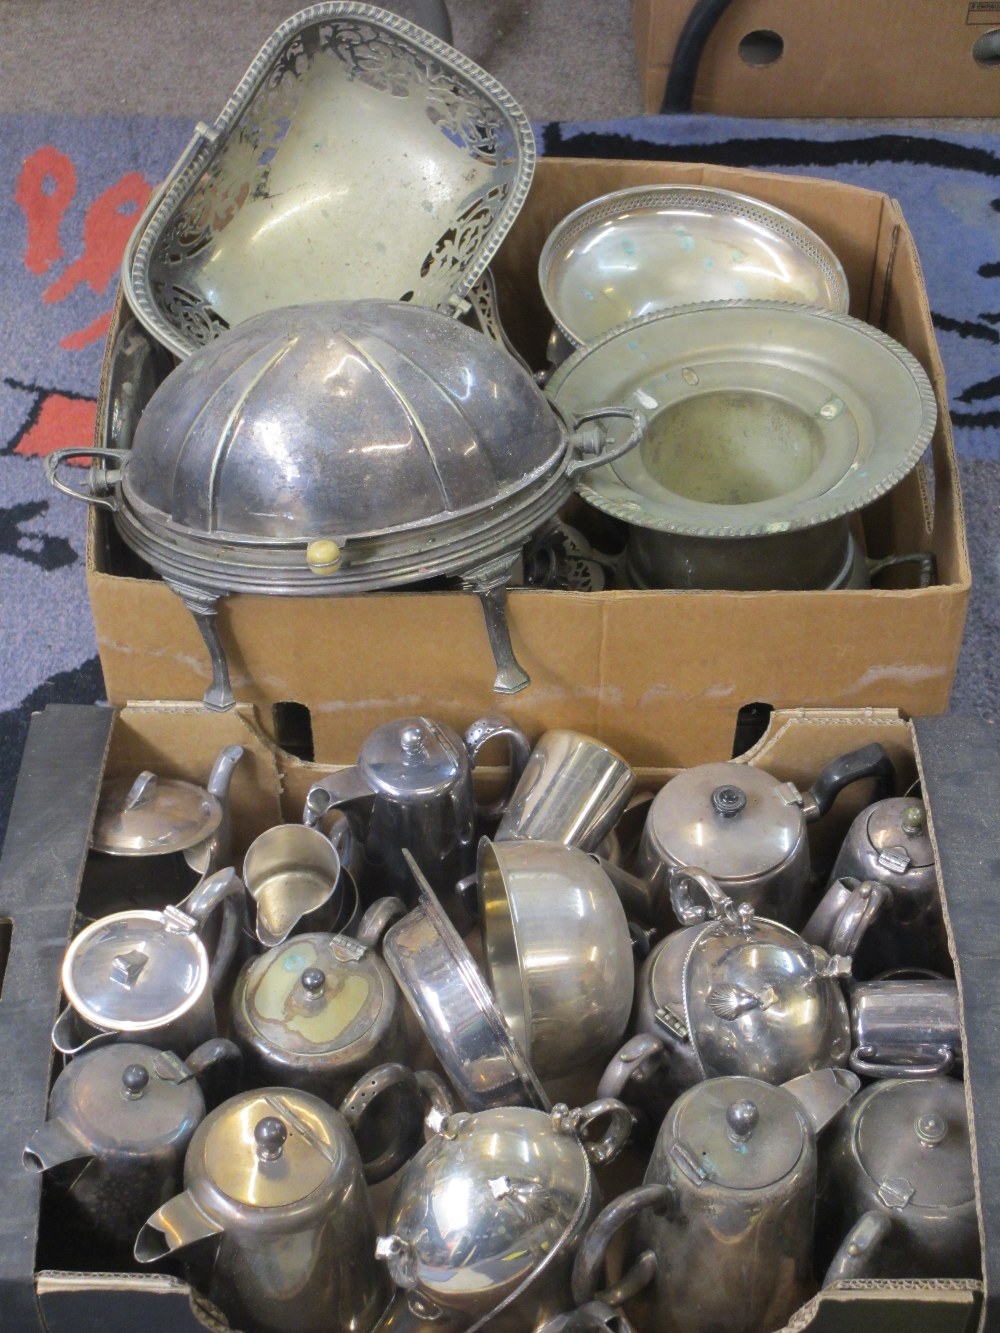 EPNS HOTEL TEAWARE, bacon server, wine cooler and other plated ware items, within 2 boxes - Image 2 of 2